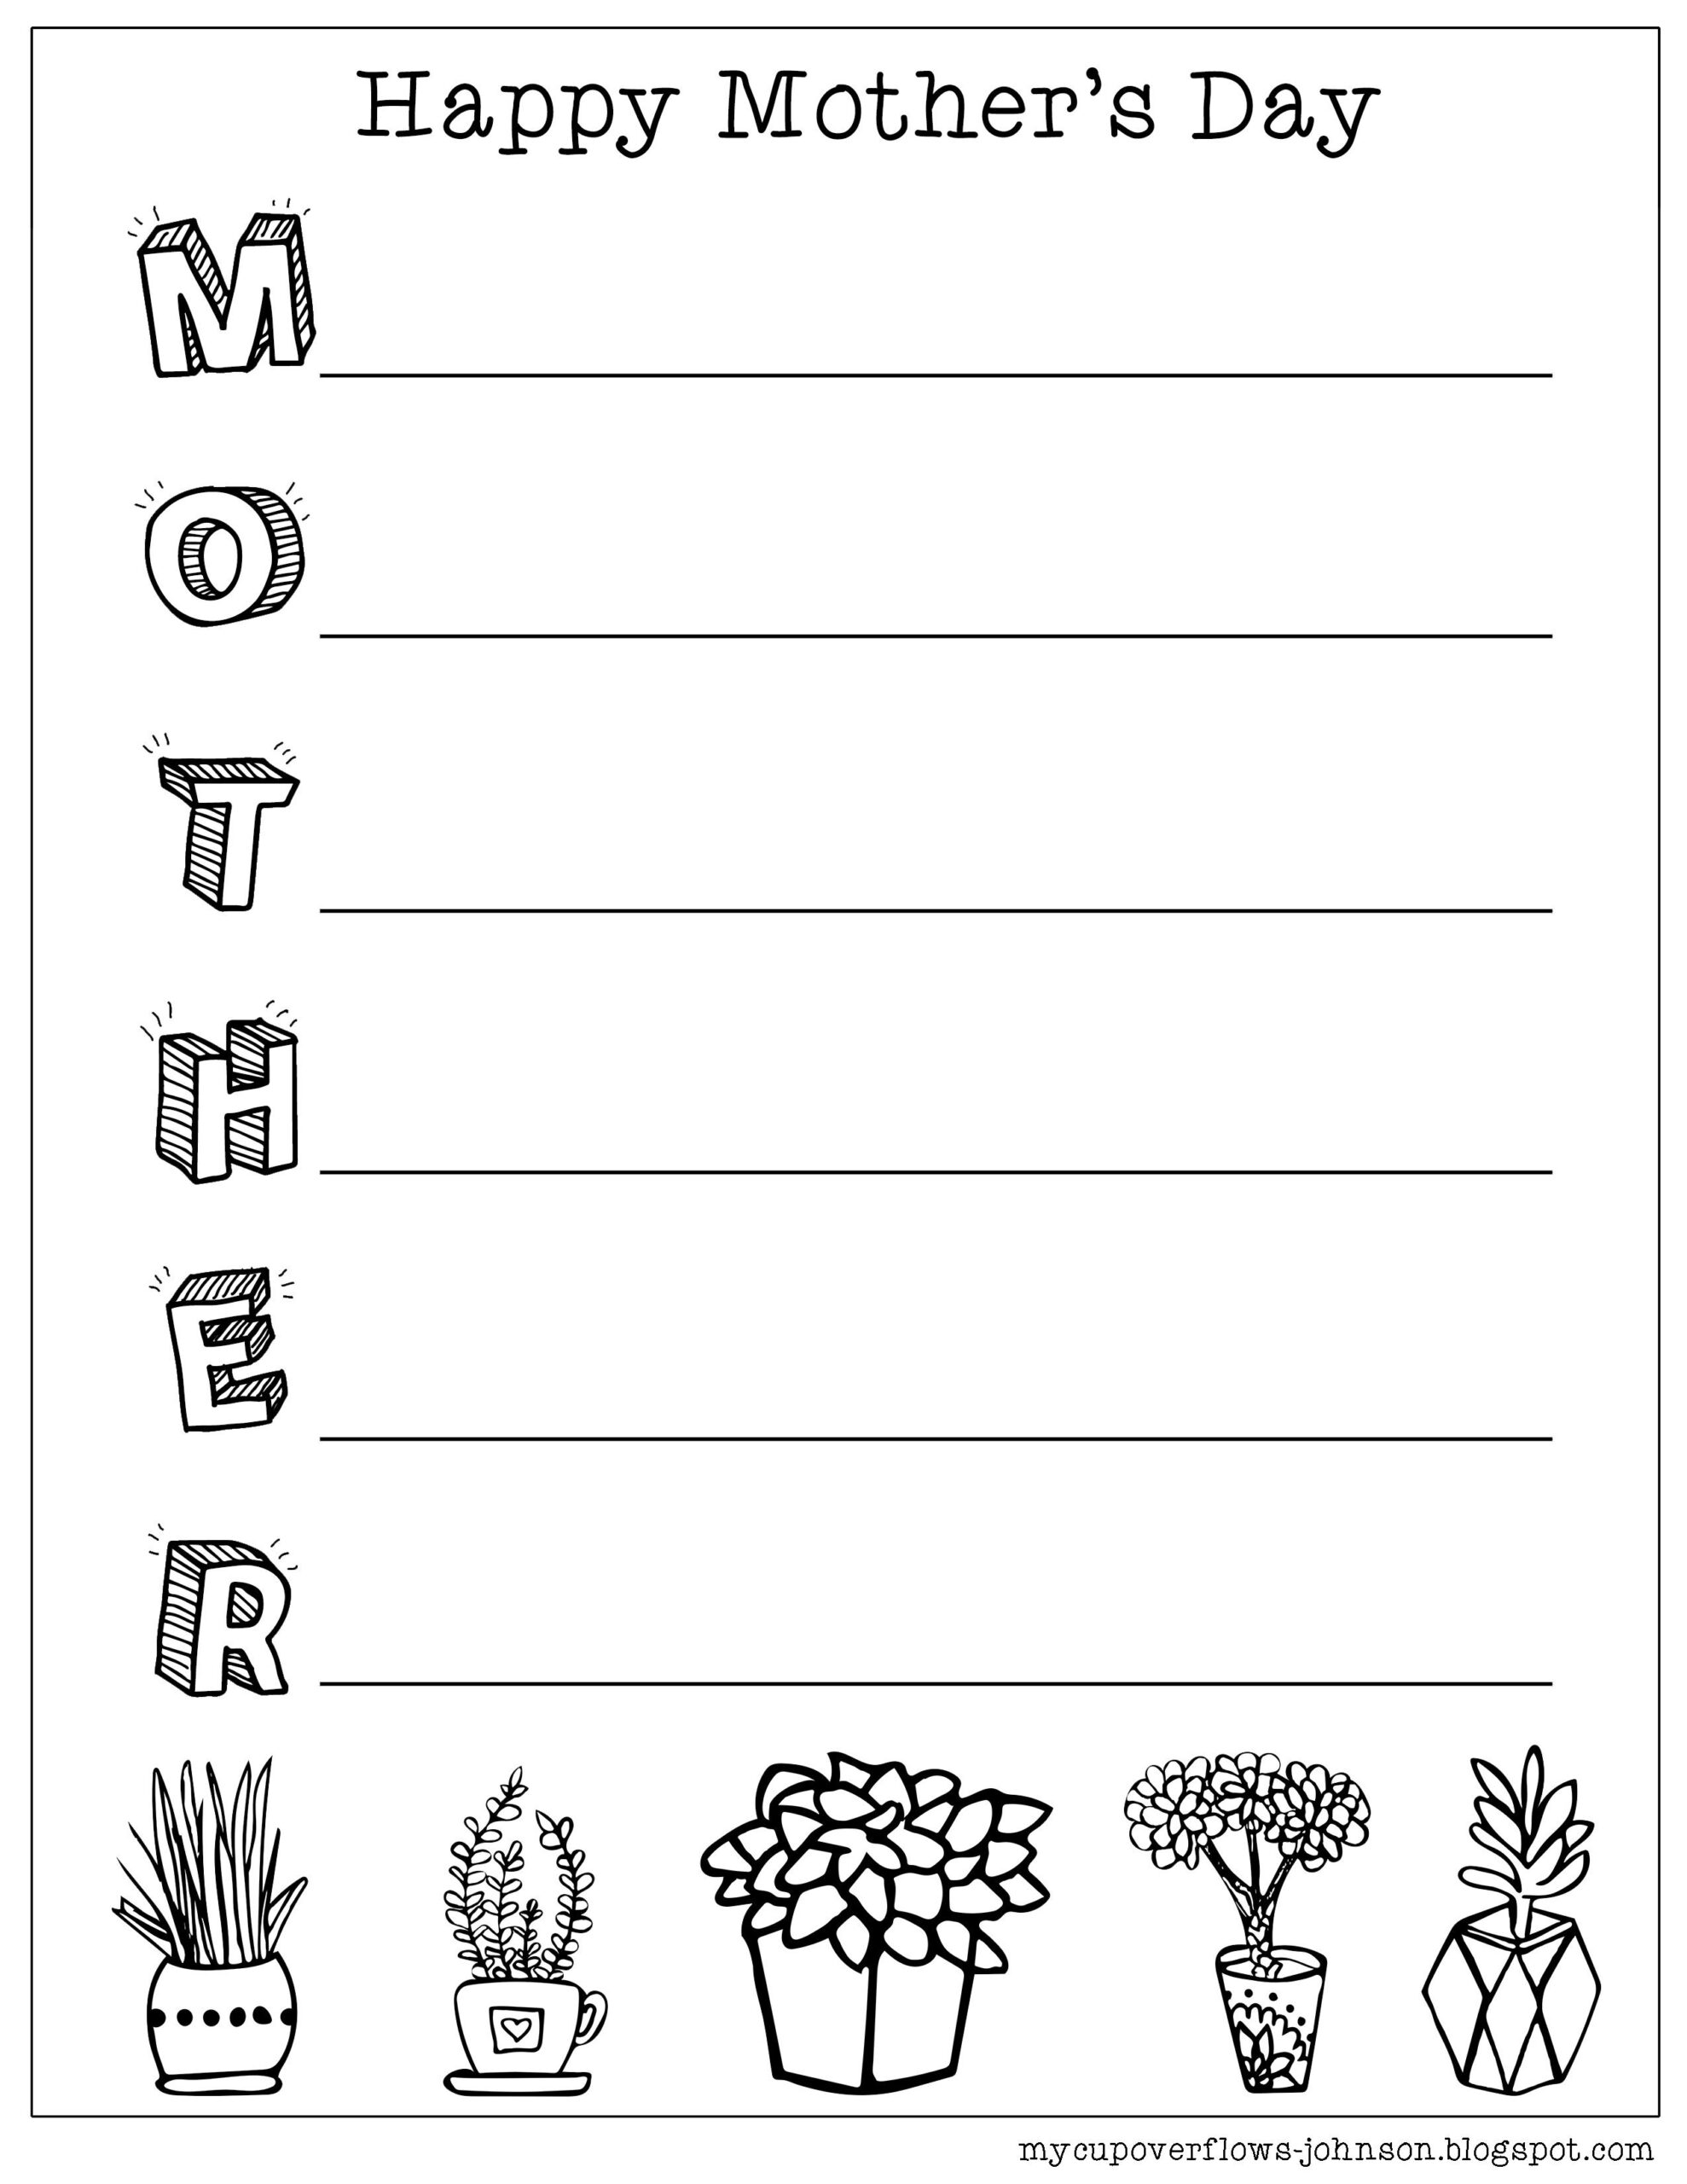 Mother s Day Coloring Pages Mothers Day Coloring Pages Acrostic Poem For Kids Mothers Day Poems